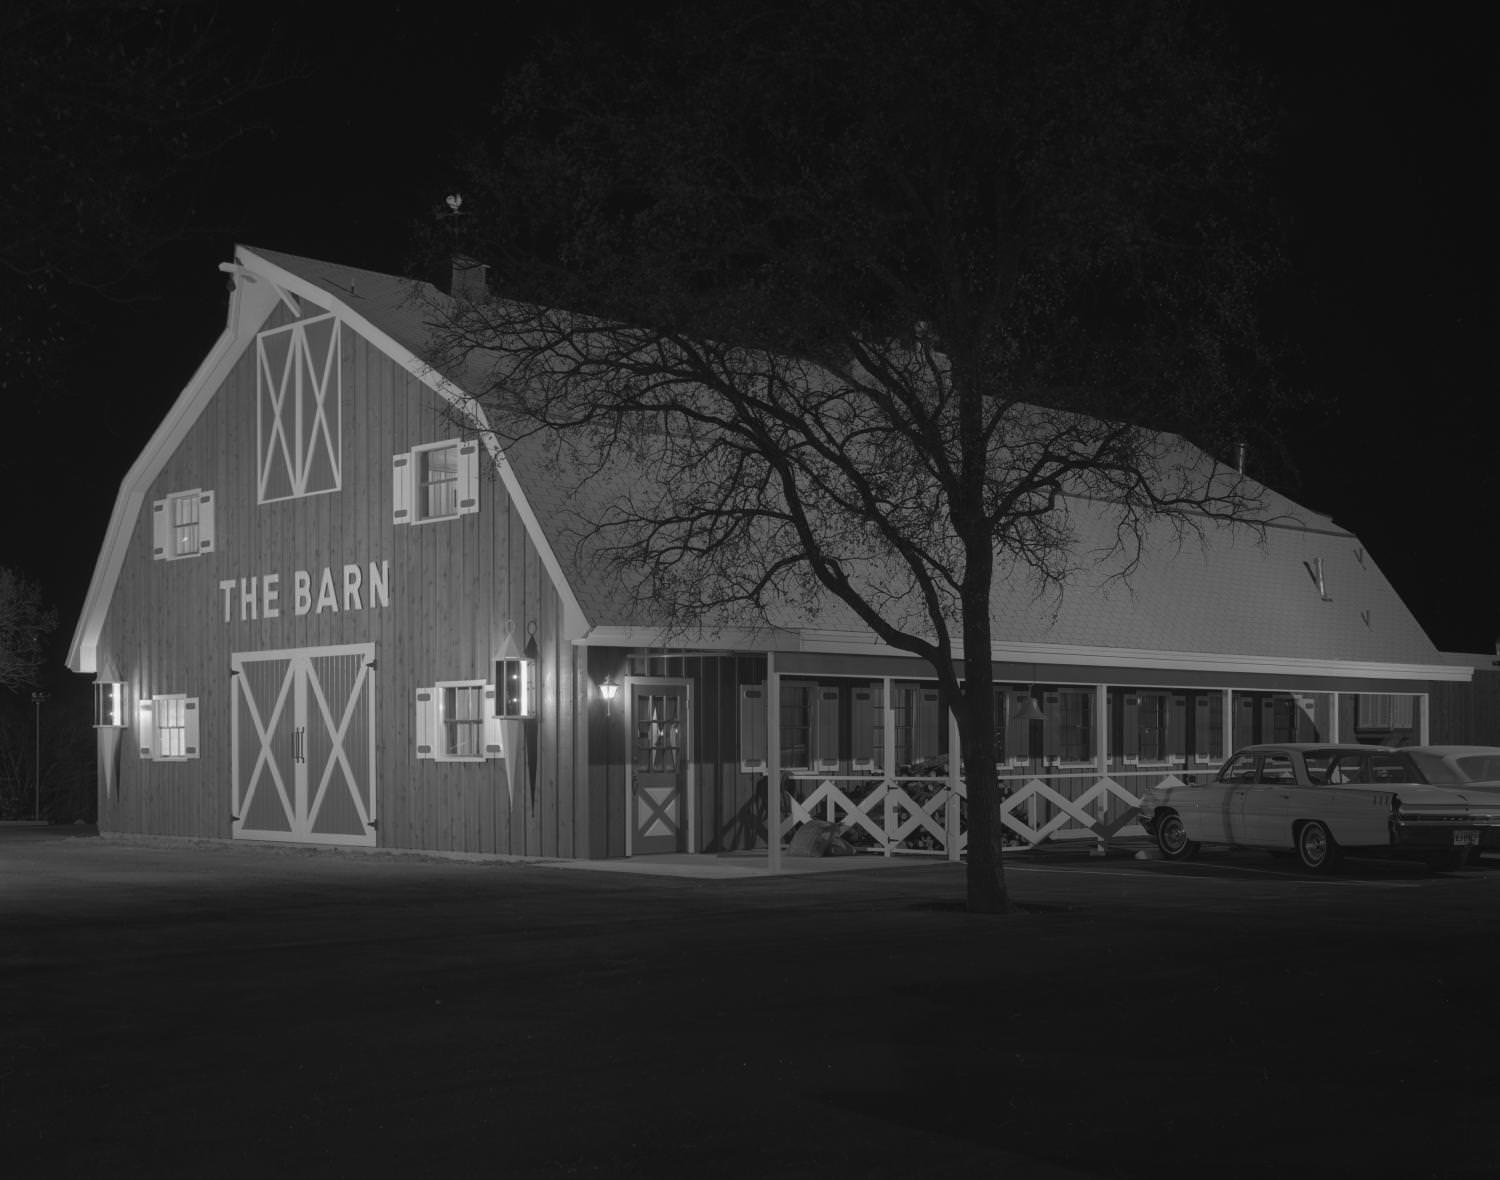 The exterior of a rustic, country themed restaurant called, The Barn, located at 8611 Balcones Drive, 1963